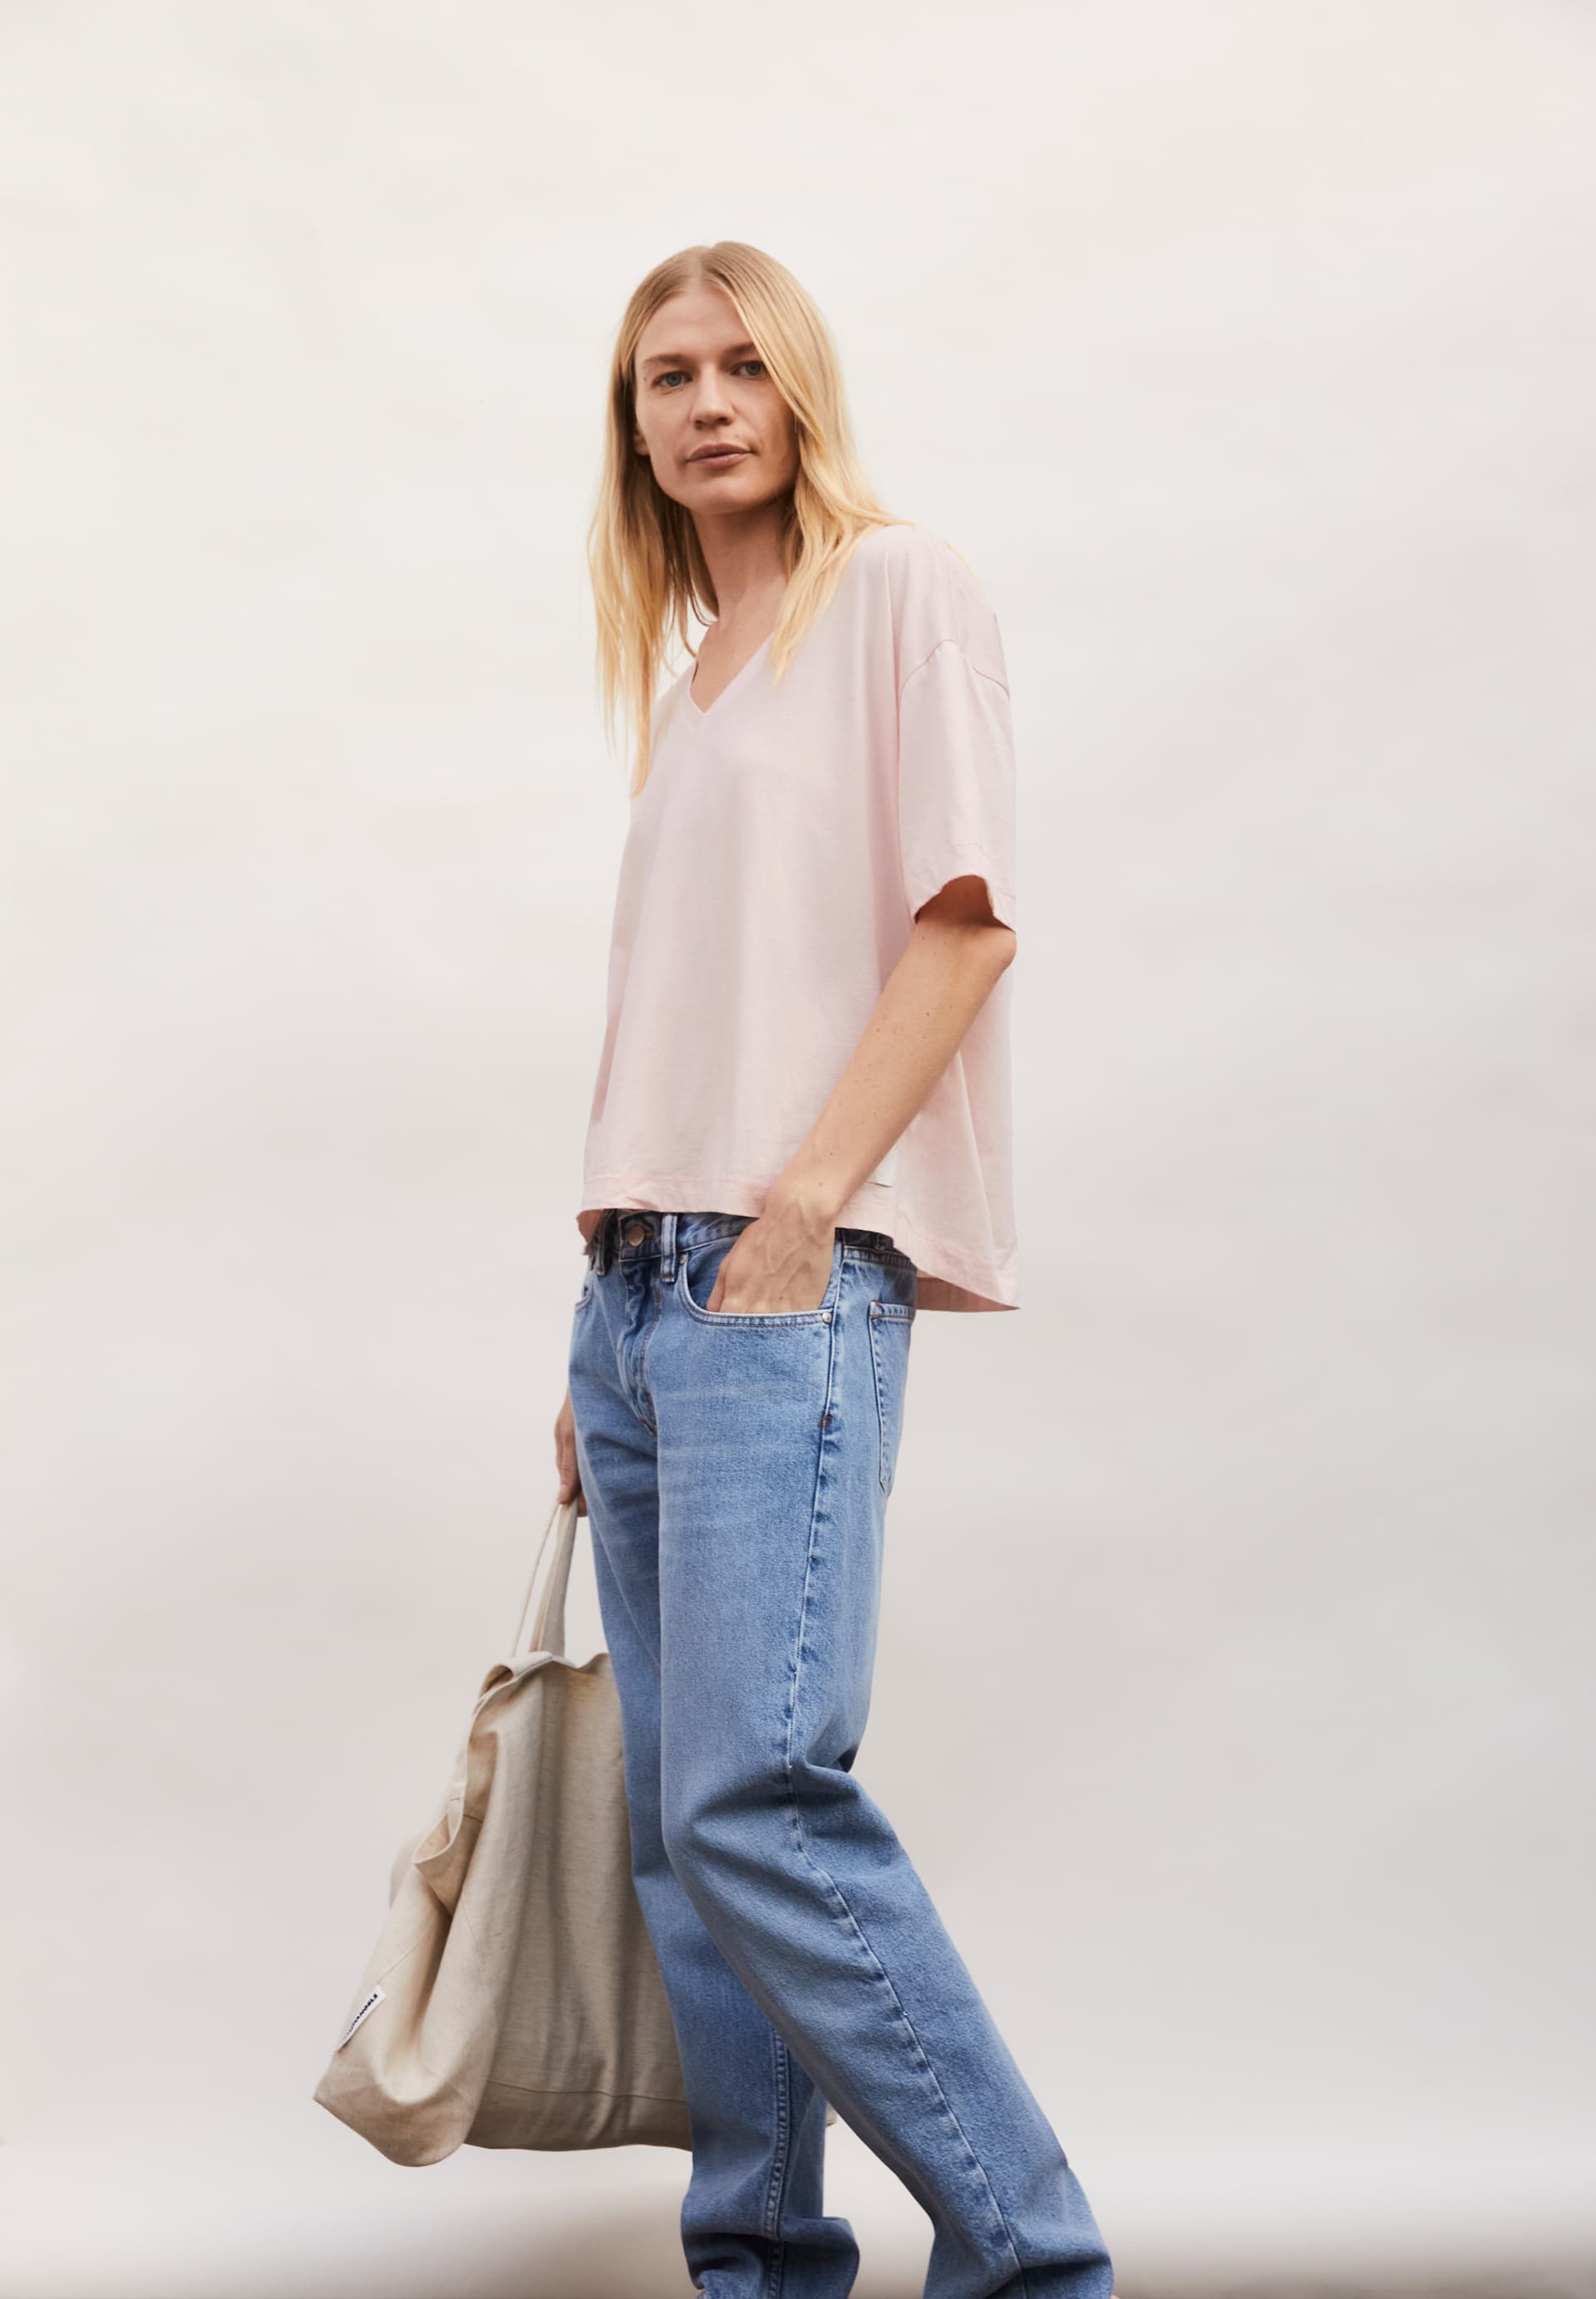 DEMIKAA T-Shirt Oversized Fit made of Organic Cotton